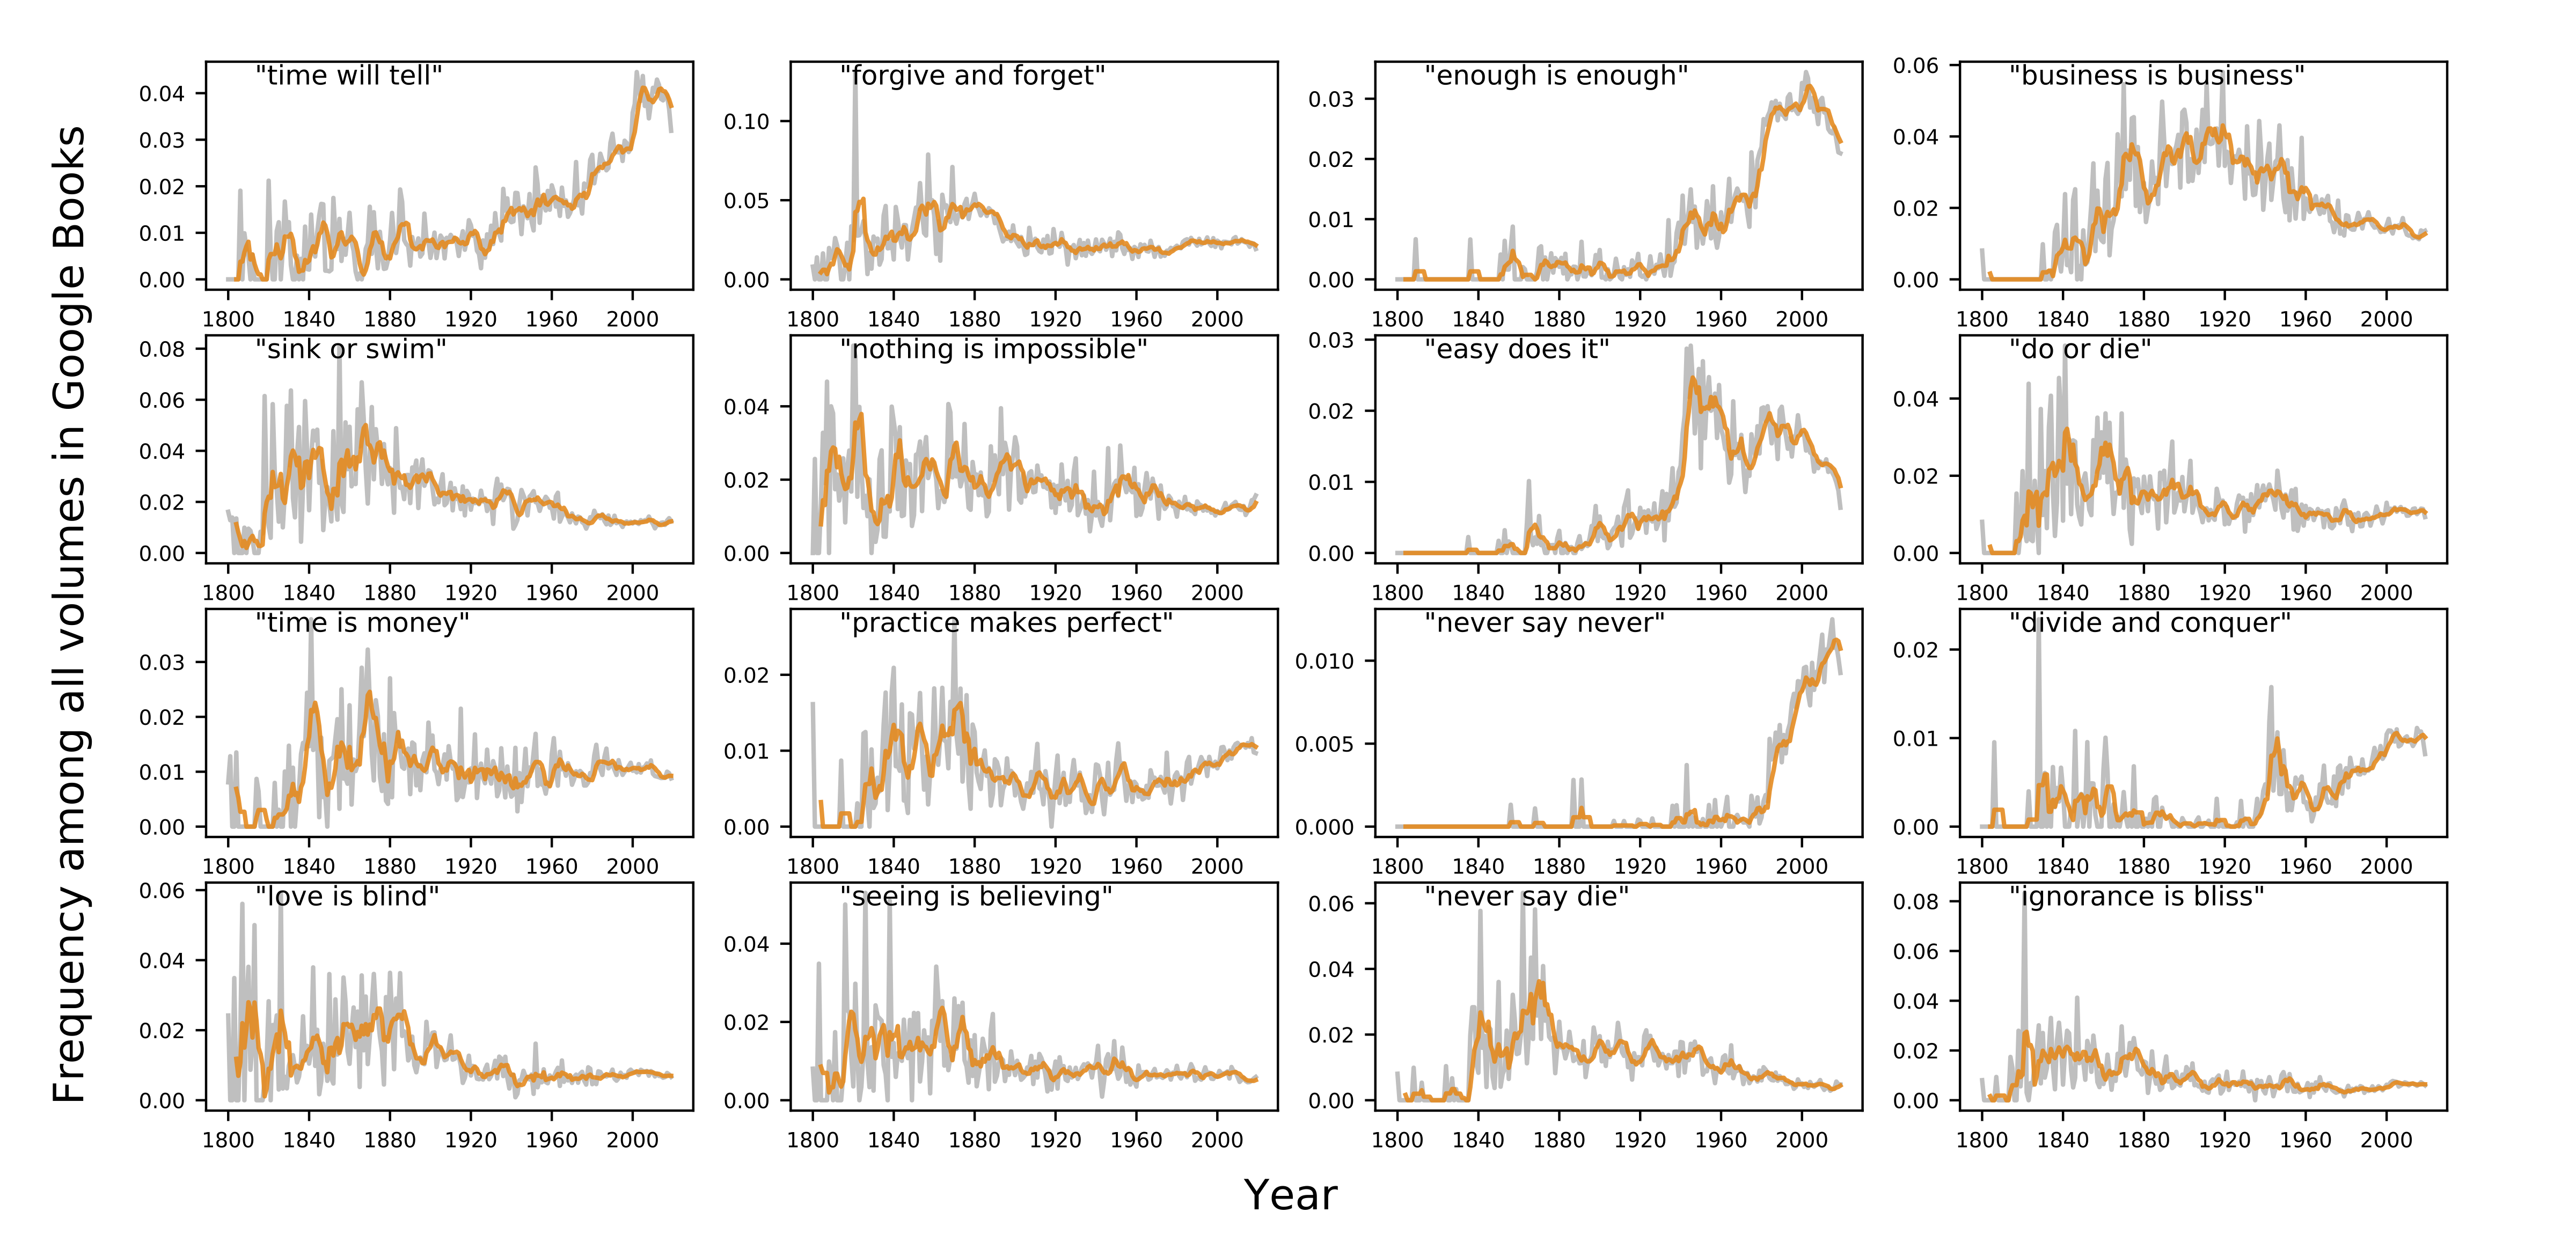 sixteen frequency charts showing the frequencies of key phrases over time. The y-axes show frequency counts and the x-axes show years from 1800 to 2000